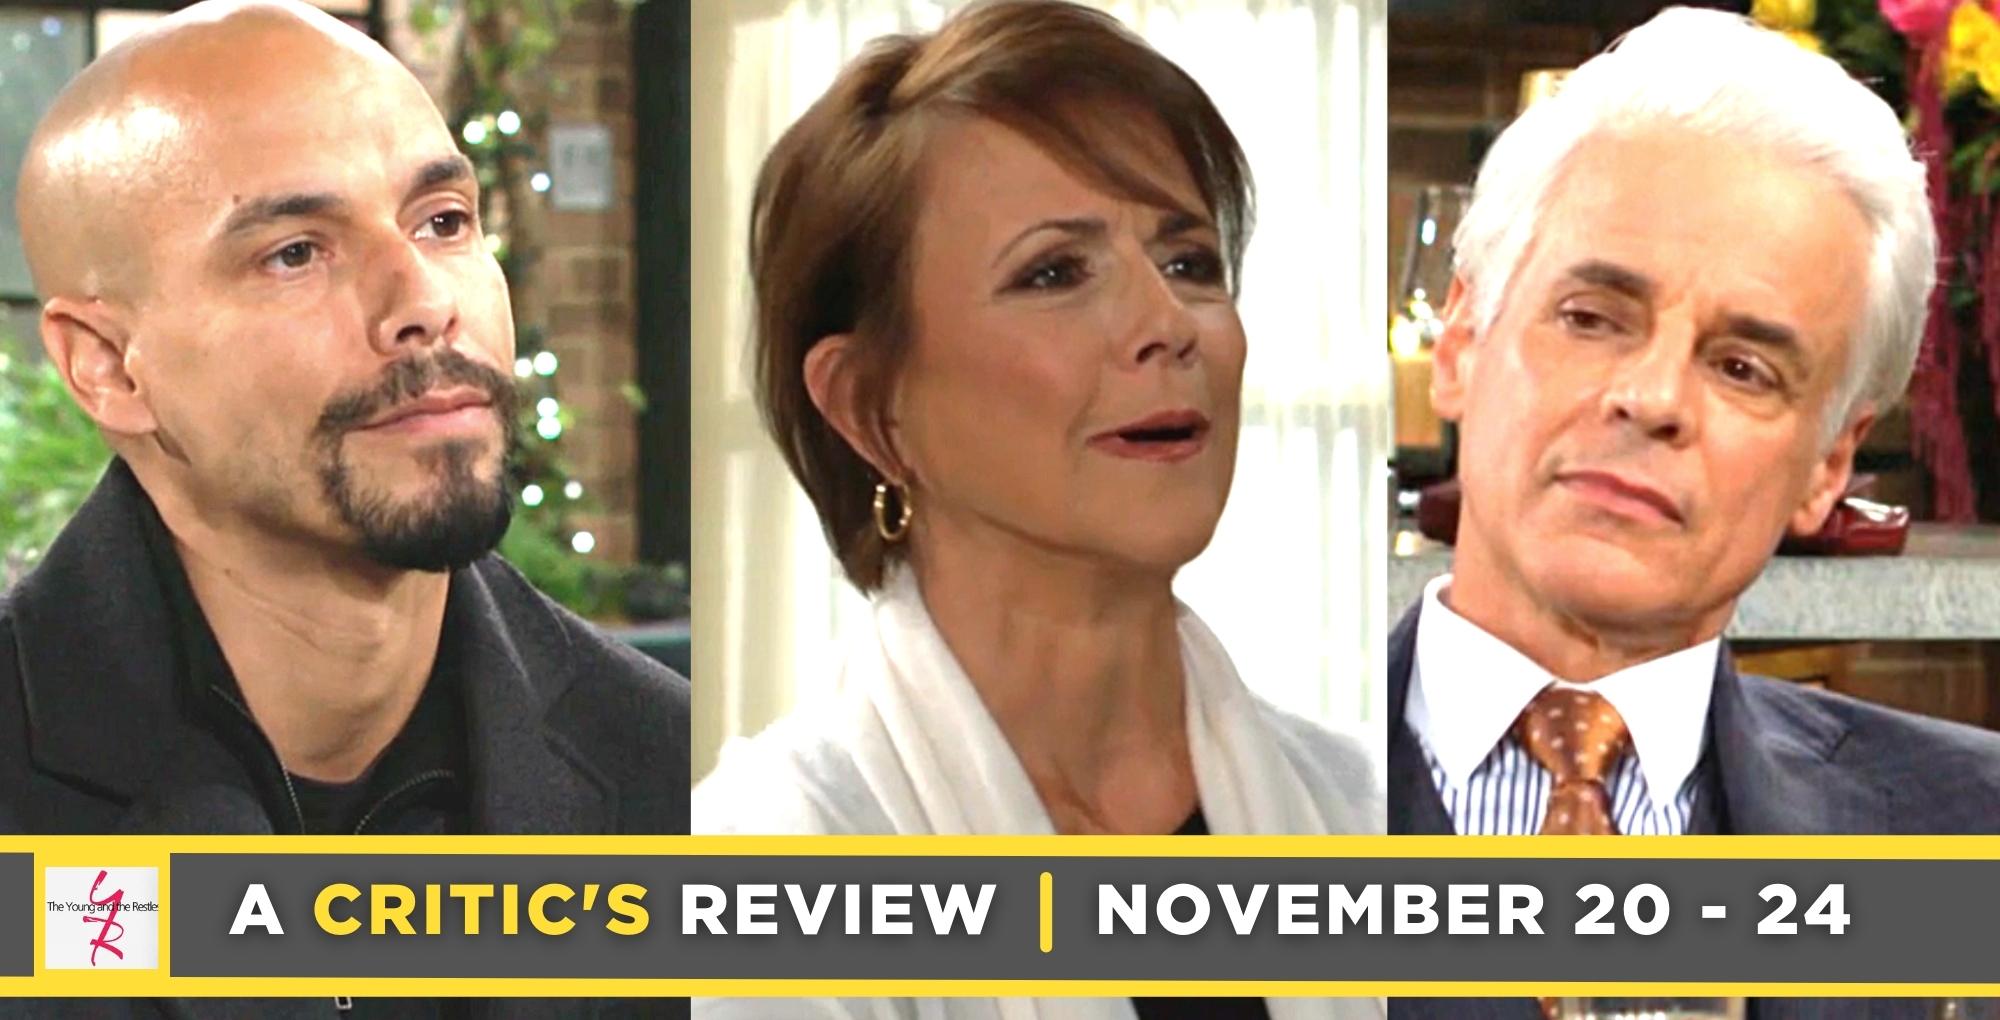 the young and the restless critic's review for november 20 – november 24, 2023, three images, devon, jordan, and michael.